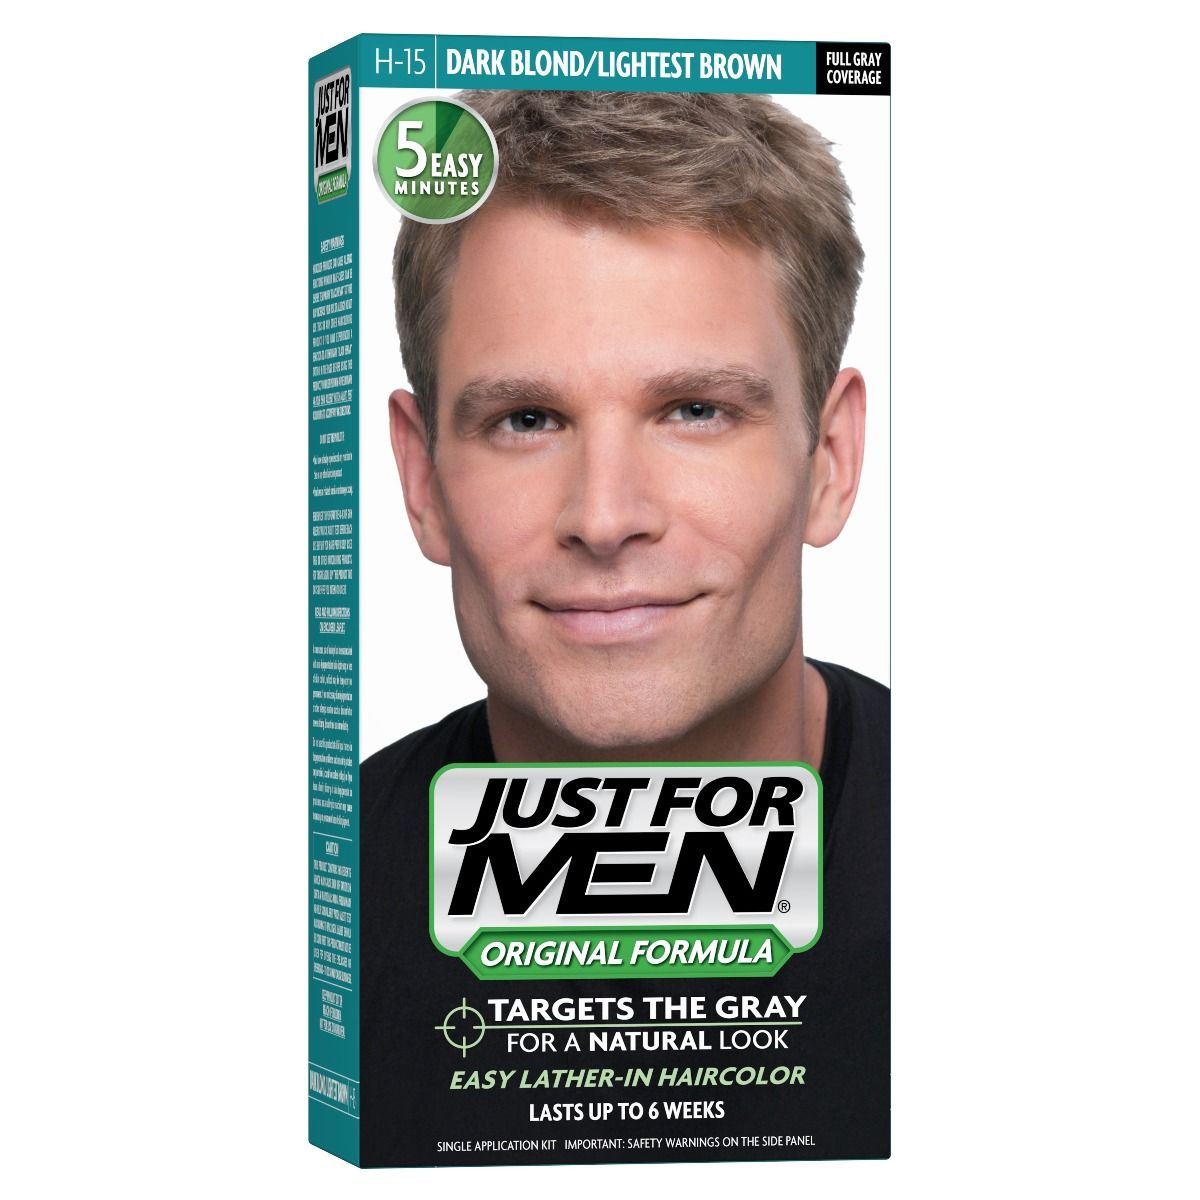 Just for Men Shampoo-In Haircolor от бренда Combe